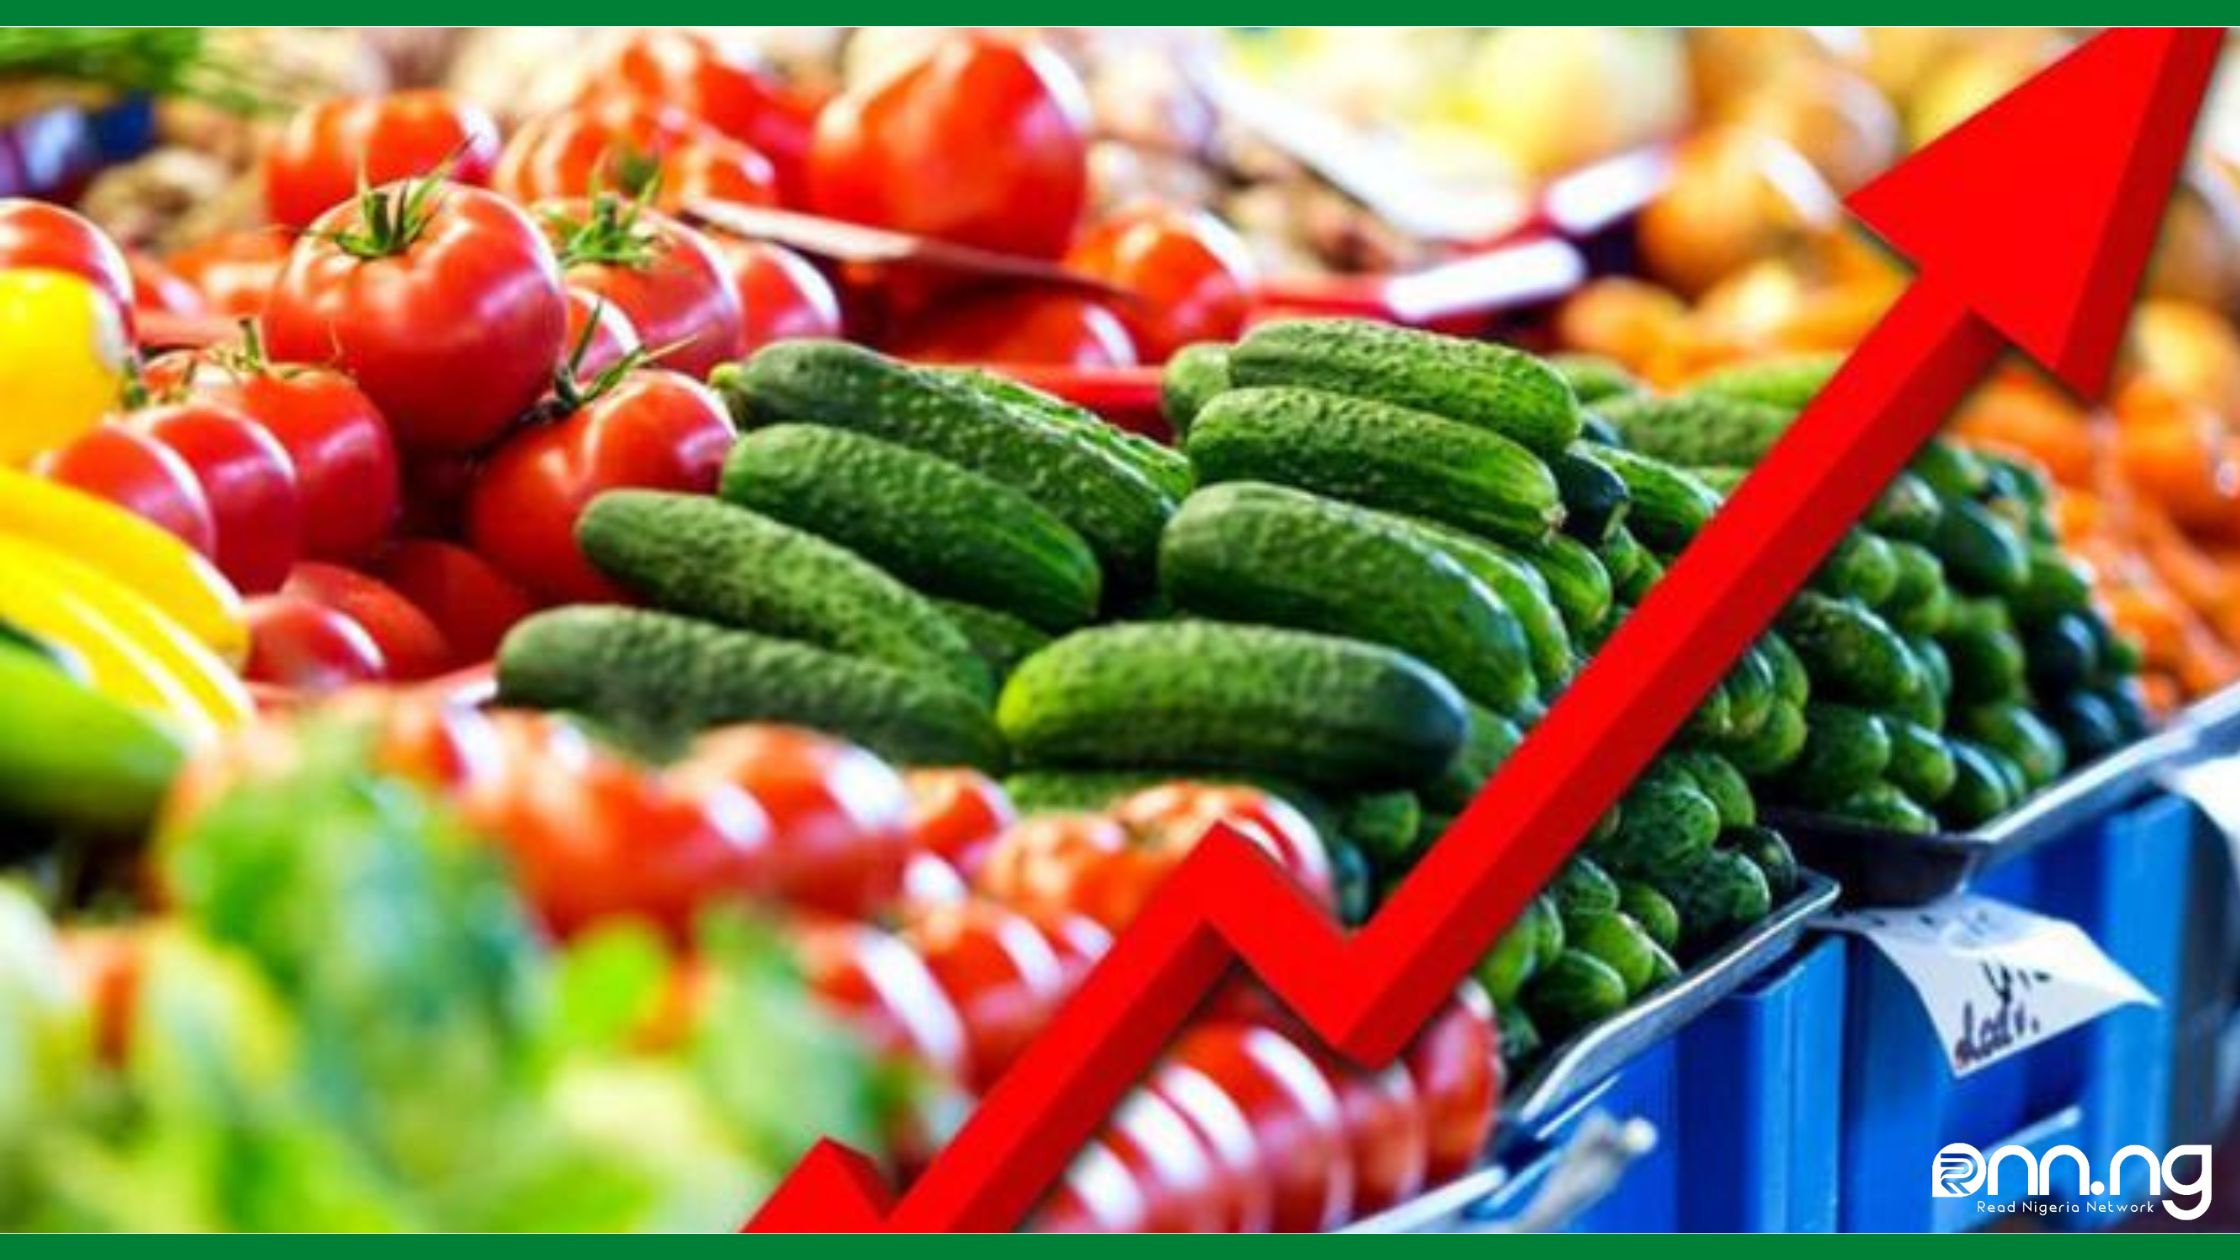 BREAKING: Nigerian inflation rate hits 22.41% in May